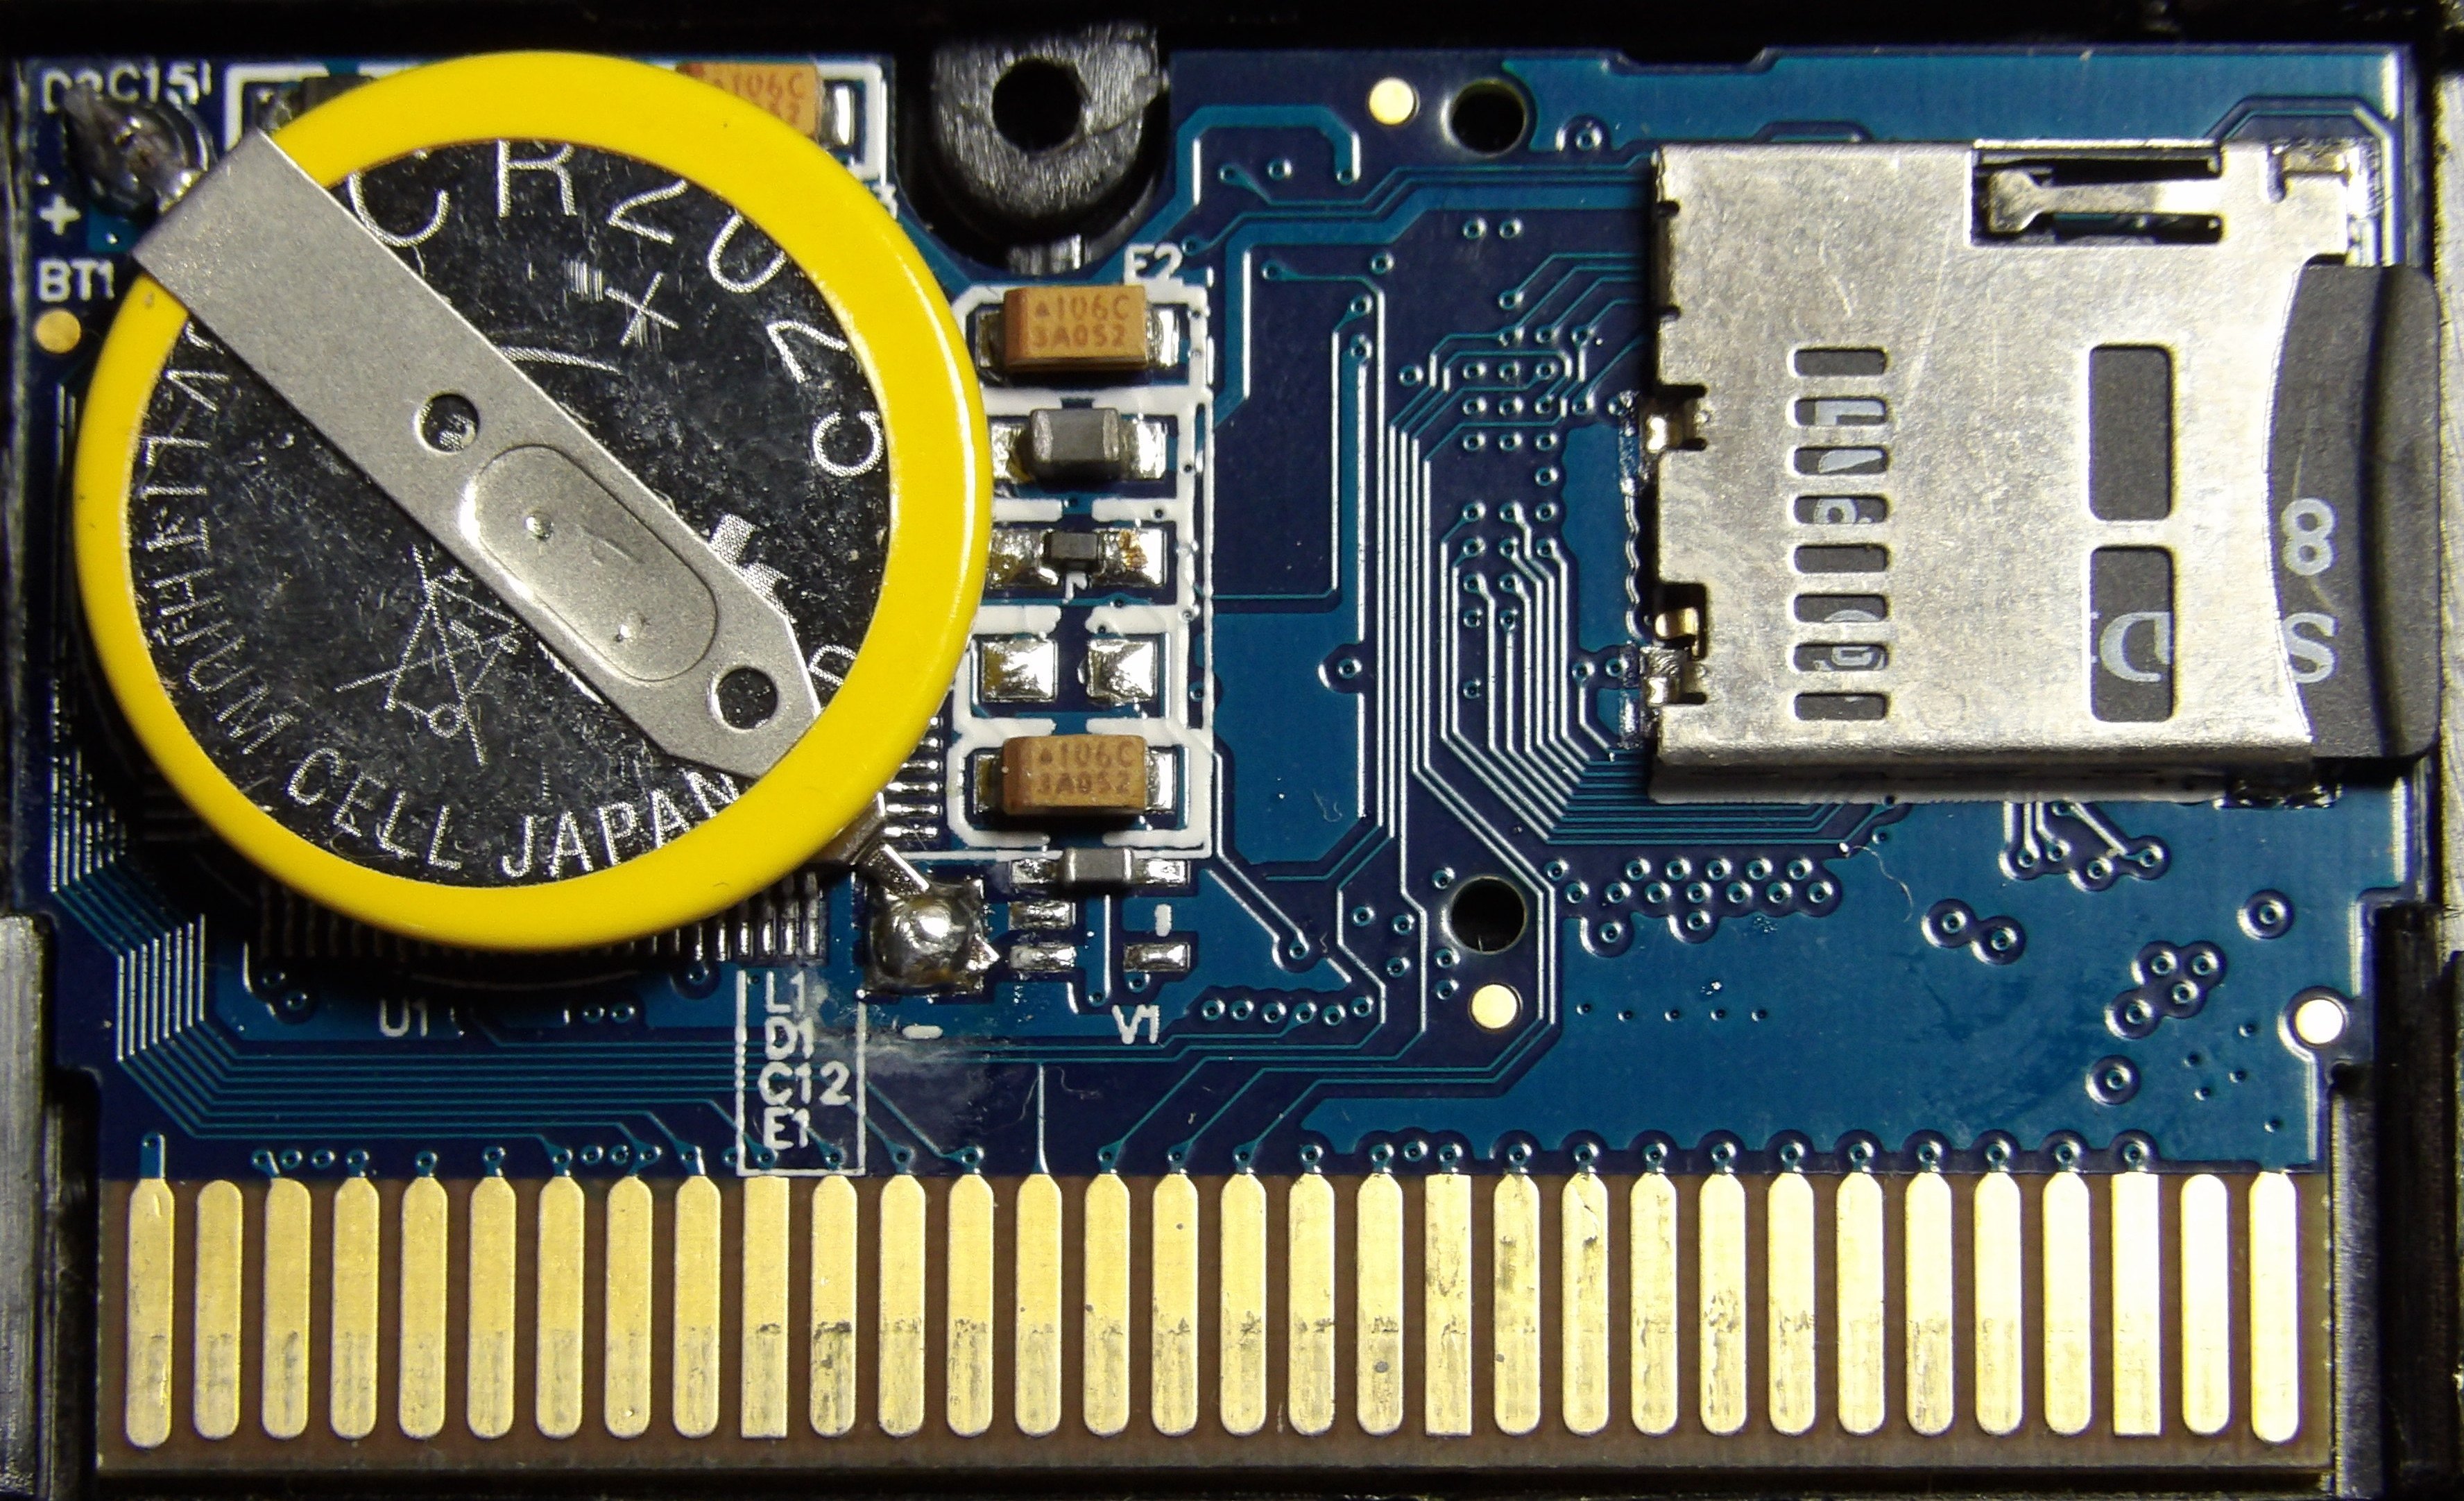 defective, battery-eating EZ Flash IV microsd board pictures | GBAtemp.net  - The Independent Video Game Community